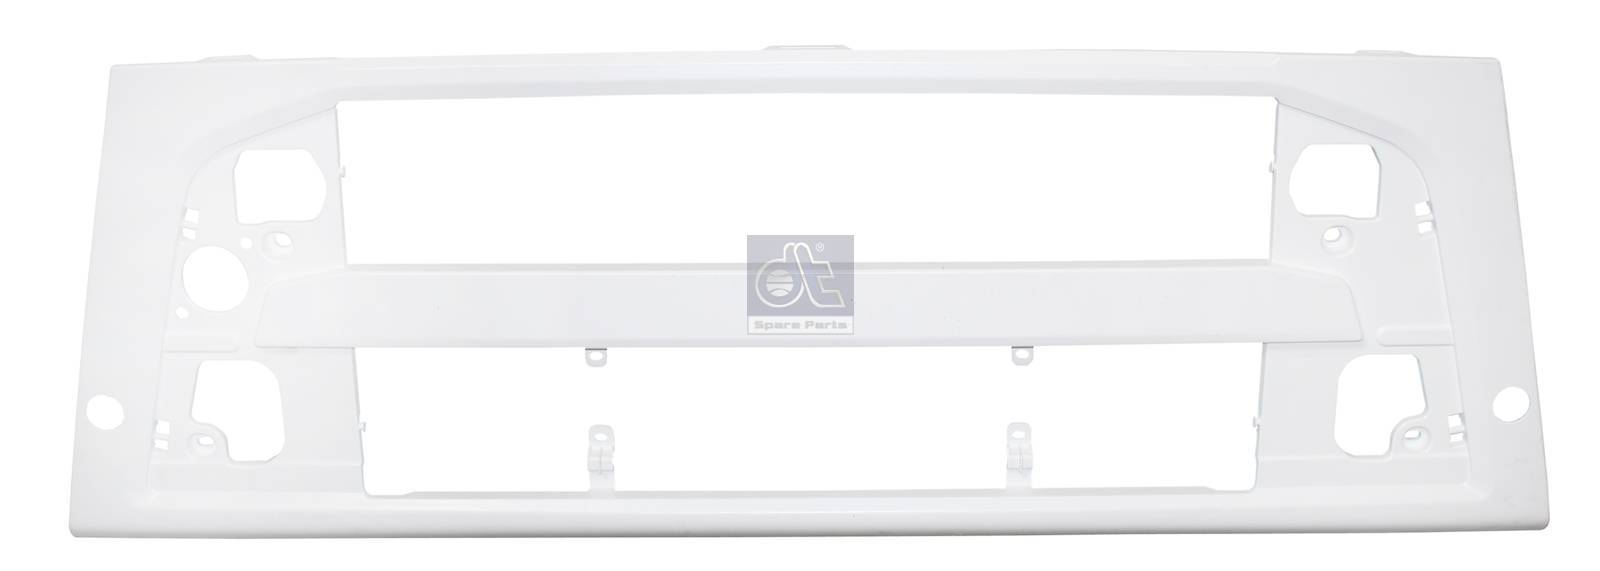 Volvo Lower Front Grille - FH 13 2008-2012